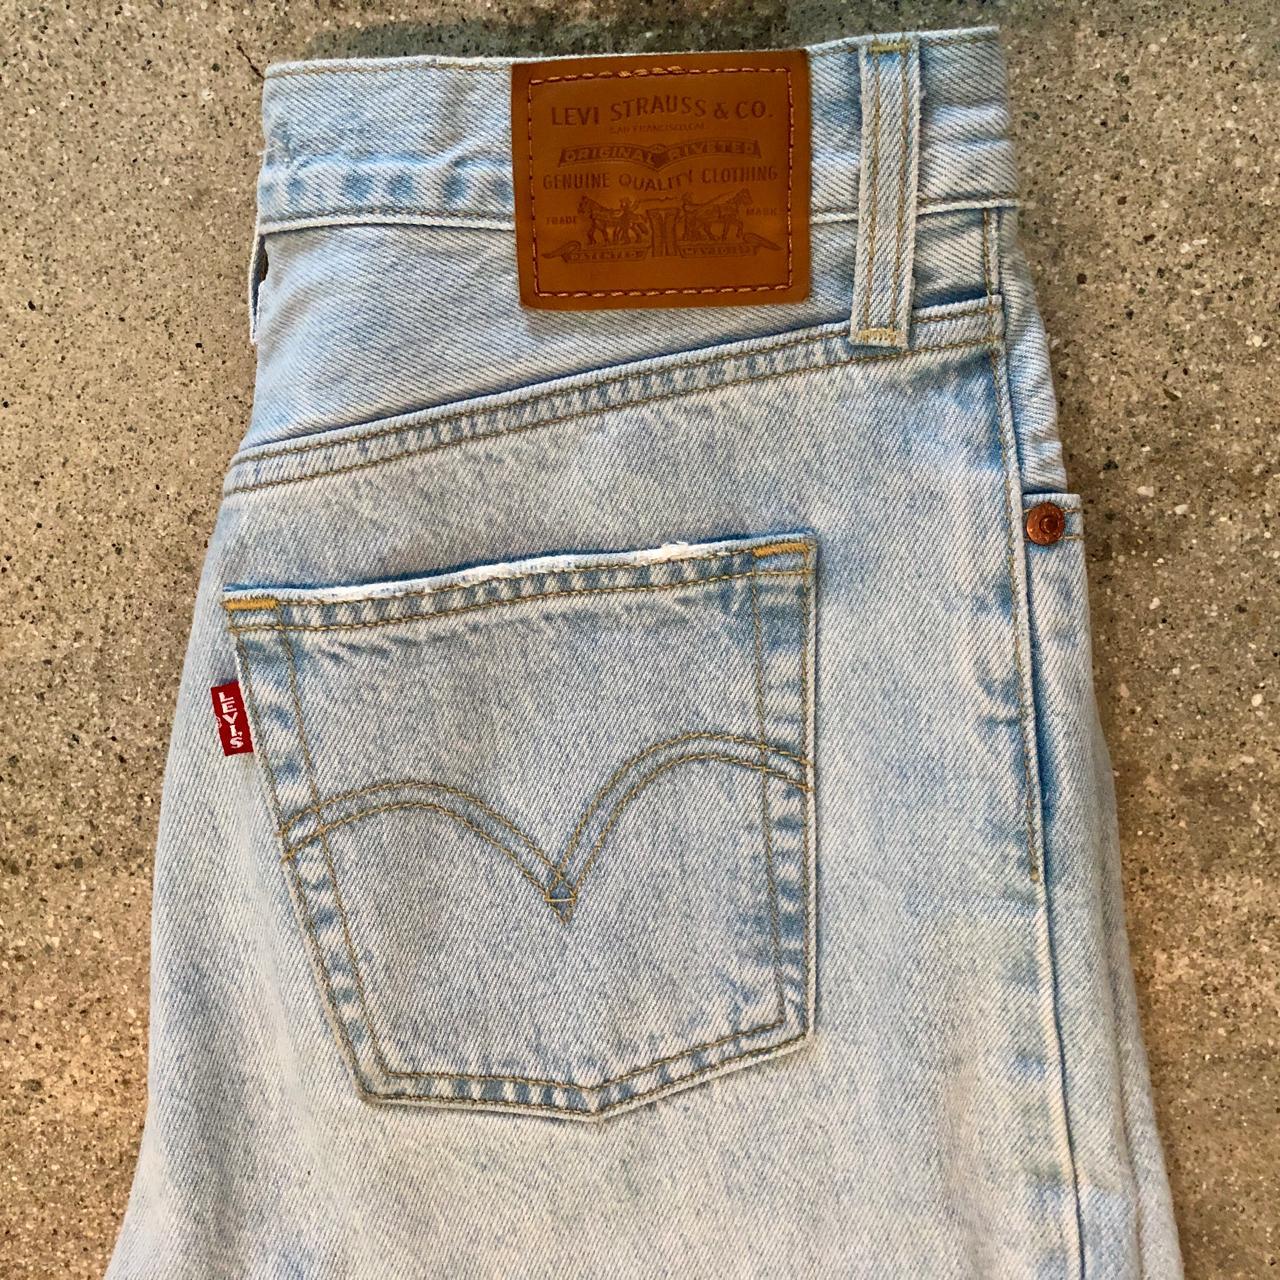 Levi's Ribcage straight ankle jeans in Ojai Shore.... - Depop